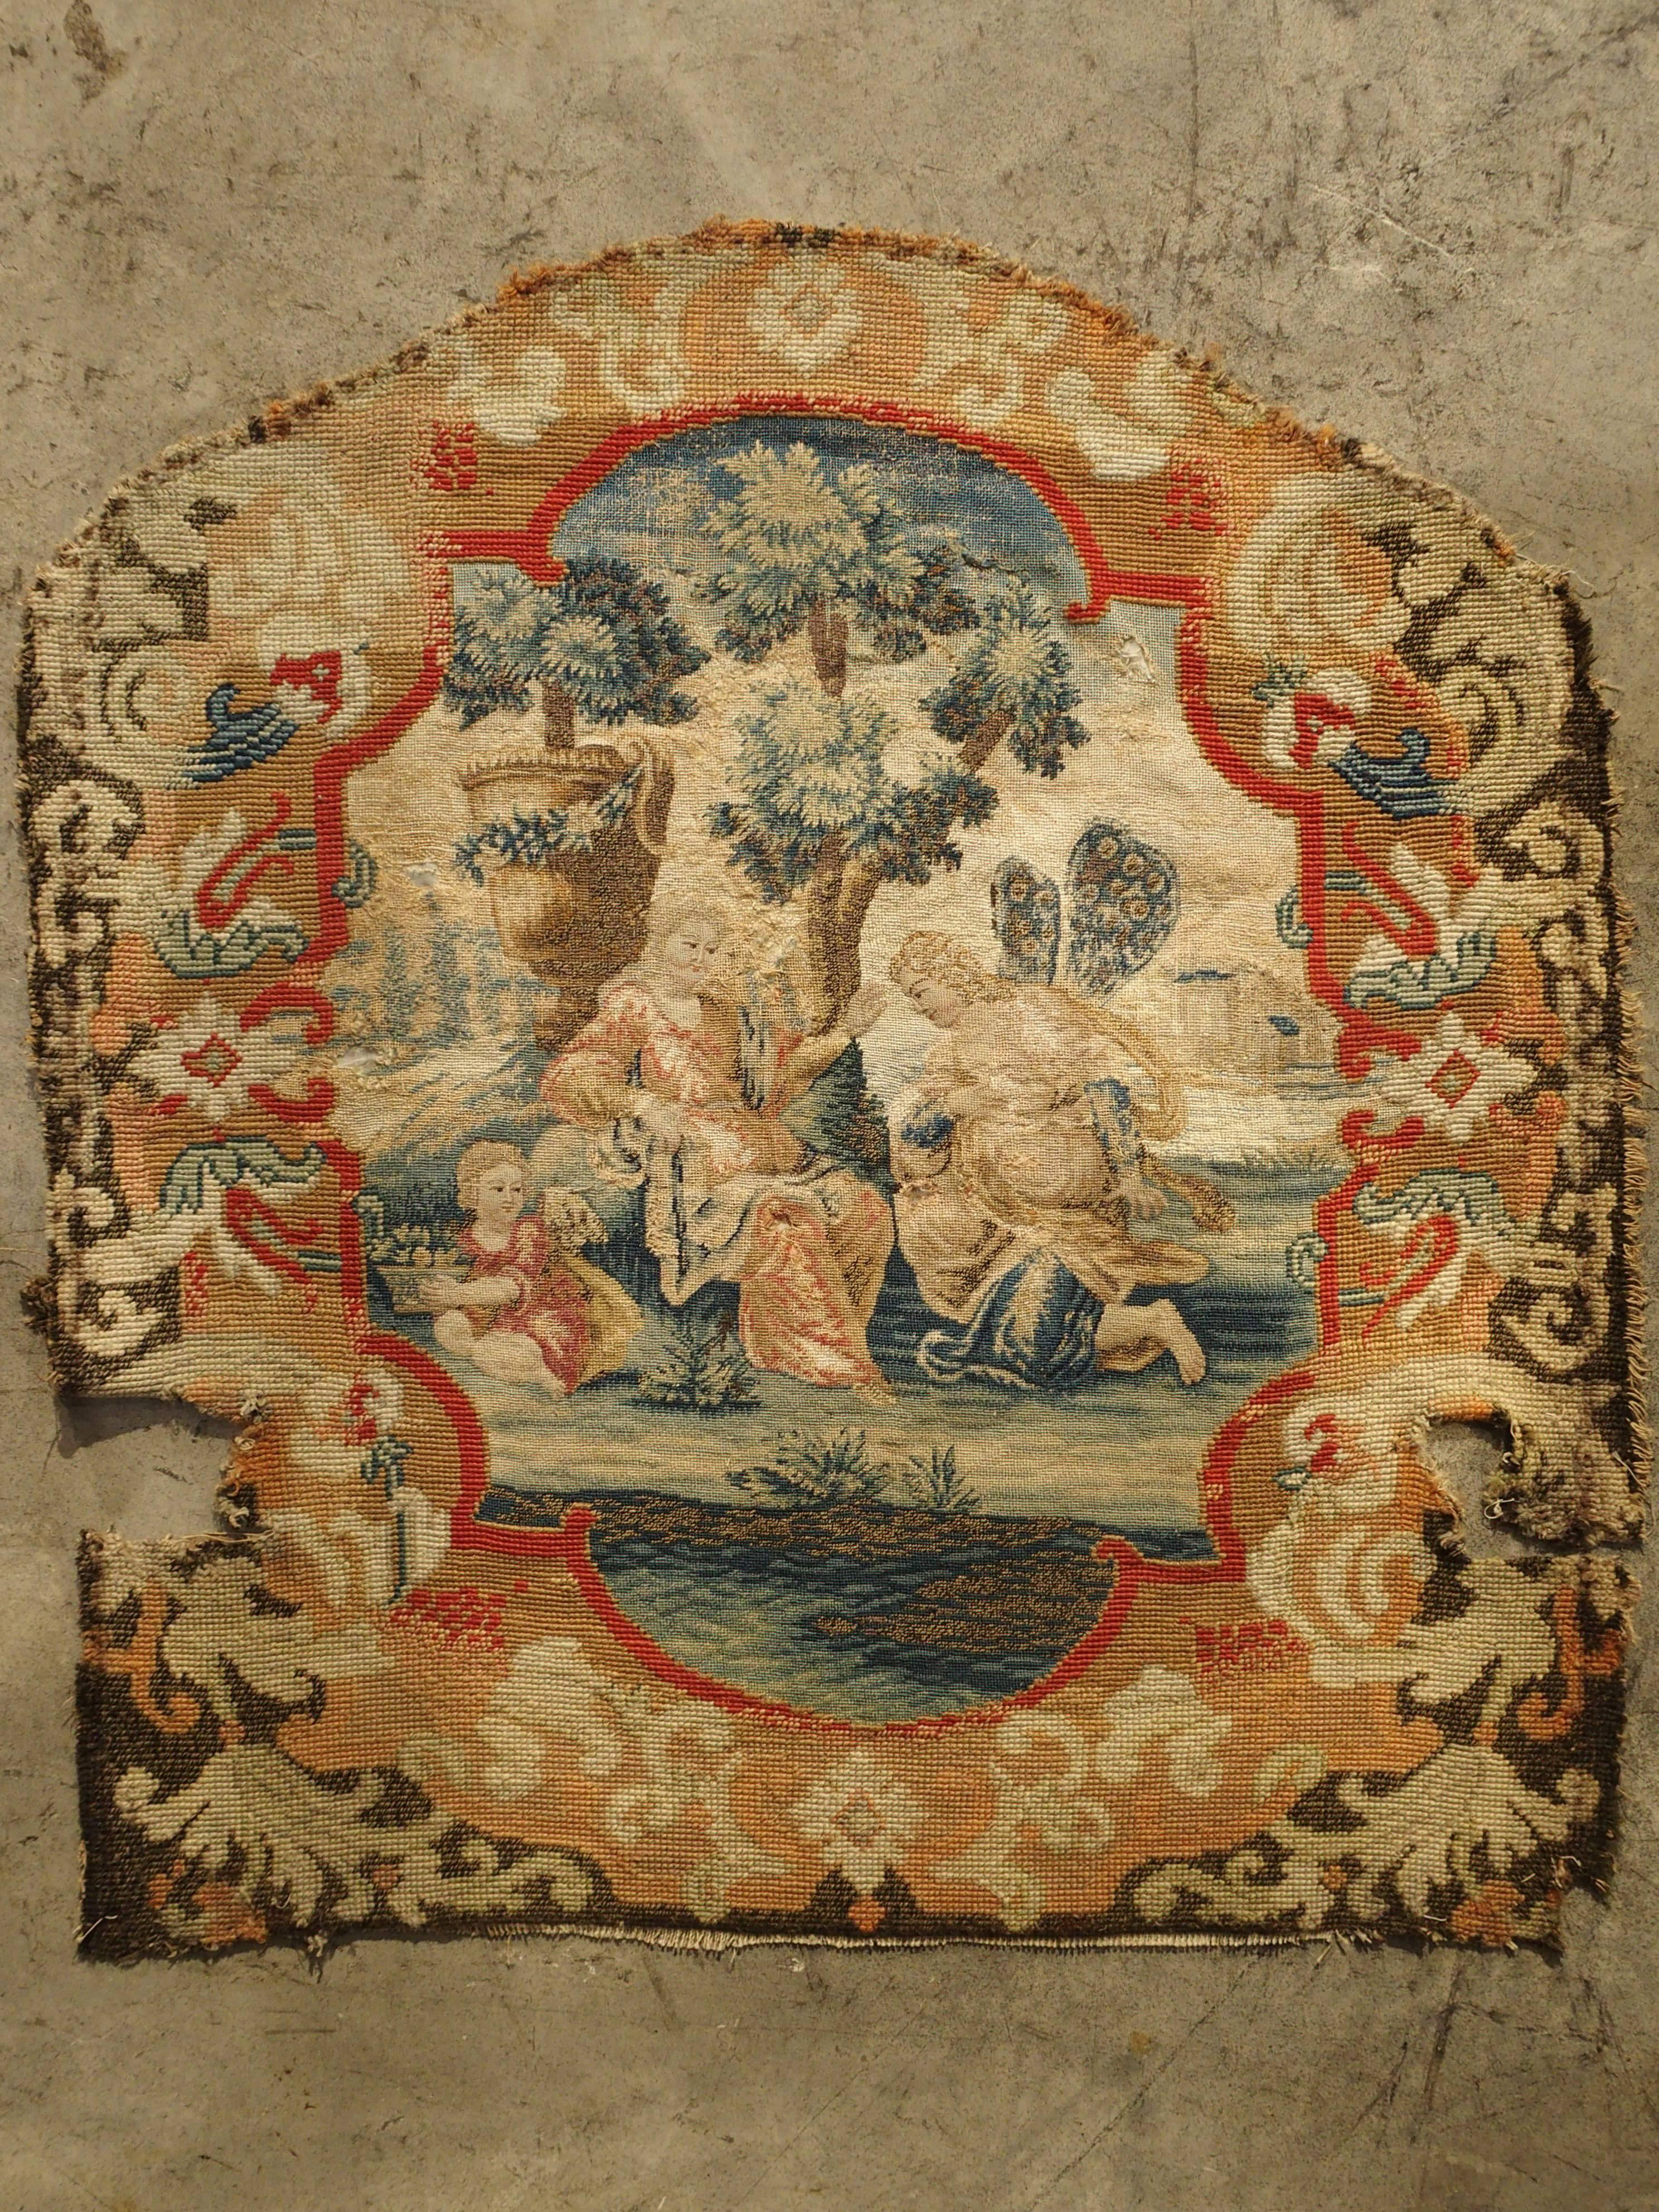 This magnificent 17th century French tapestry chair back panel with needlepoint border has most likely outlived the original wooden frame it was made for.  The central scene depicts a garden setting with a body of water, a large medici urn, and